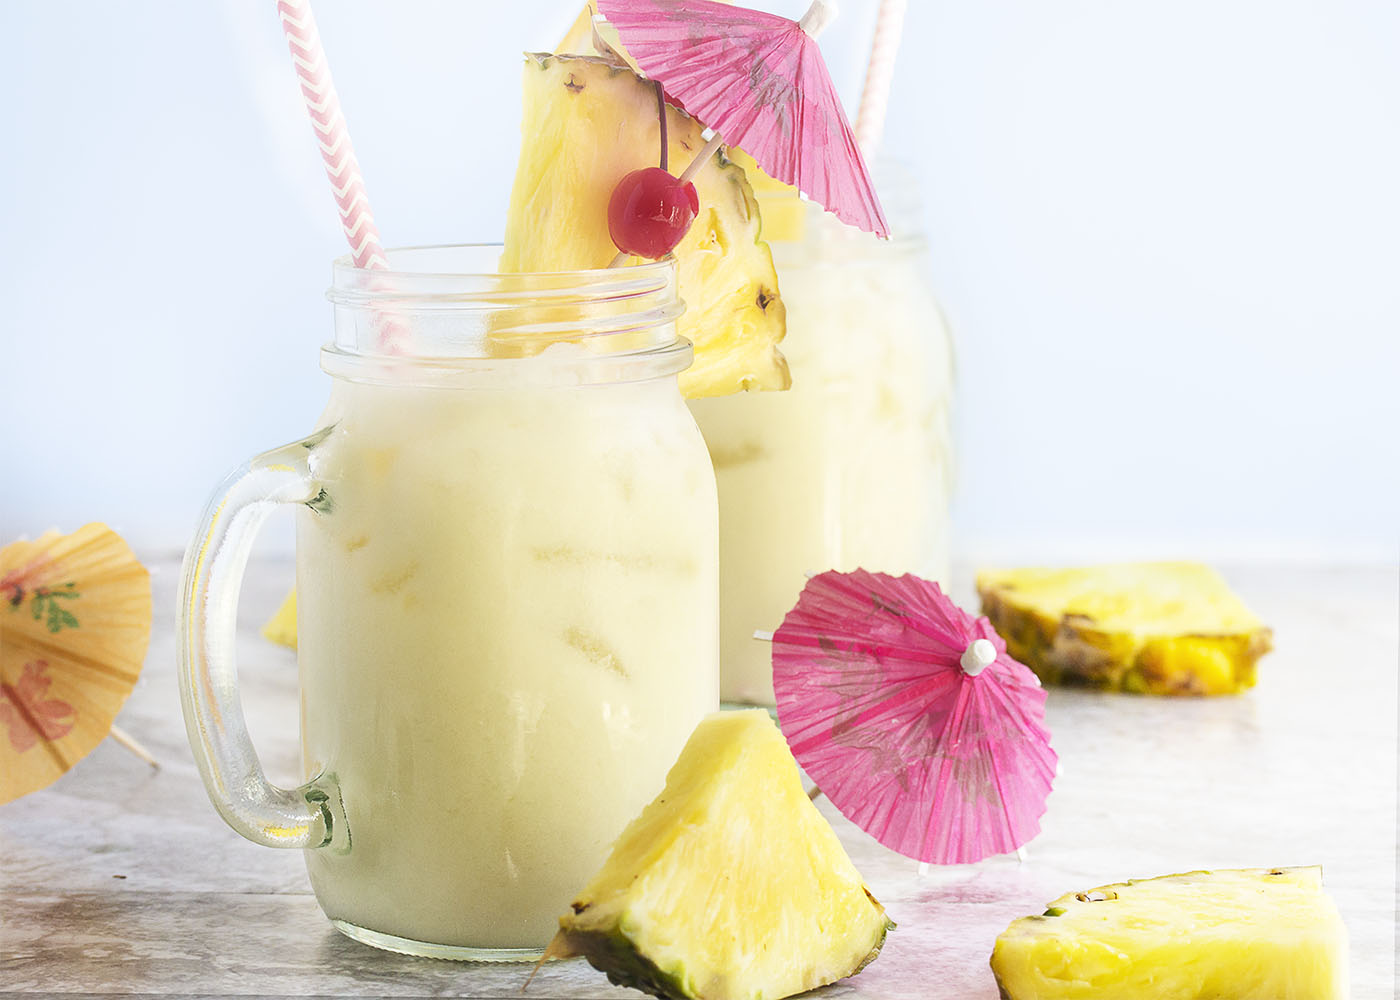 View of two pina coladas in mason jar glasses with straws, umbrellsas, and pineapple slices.